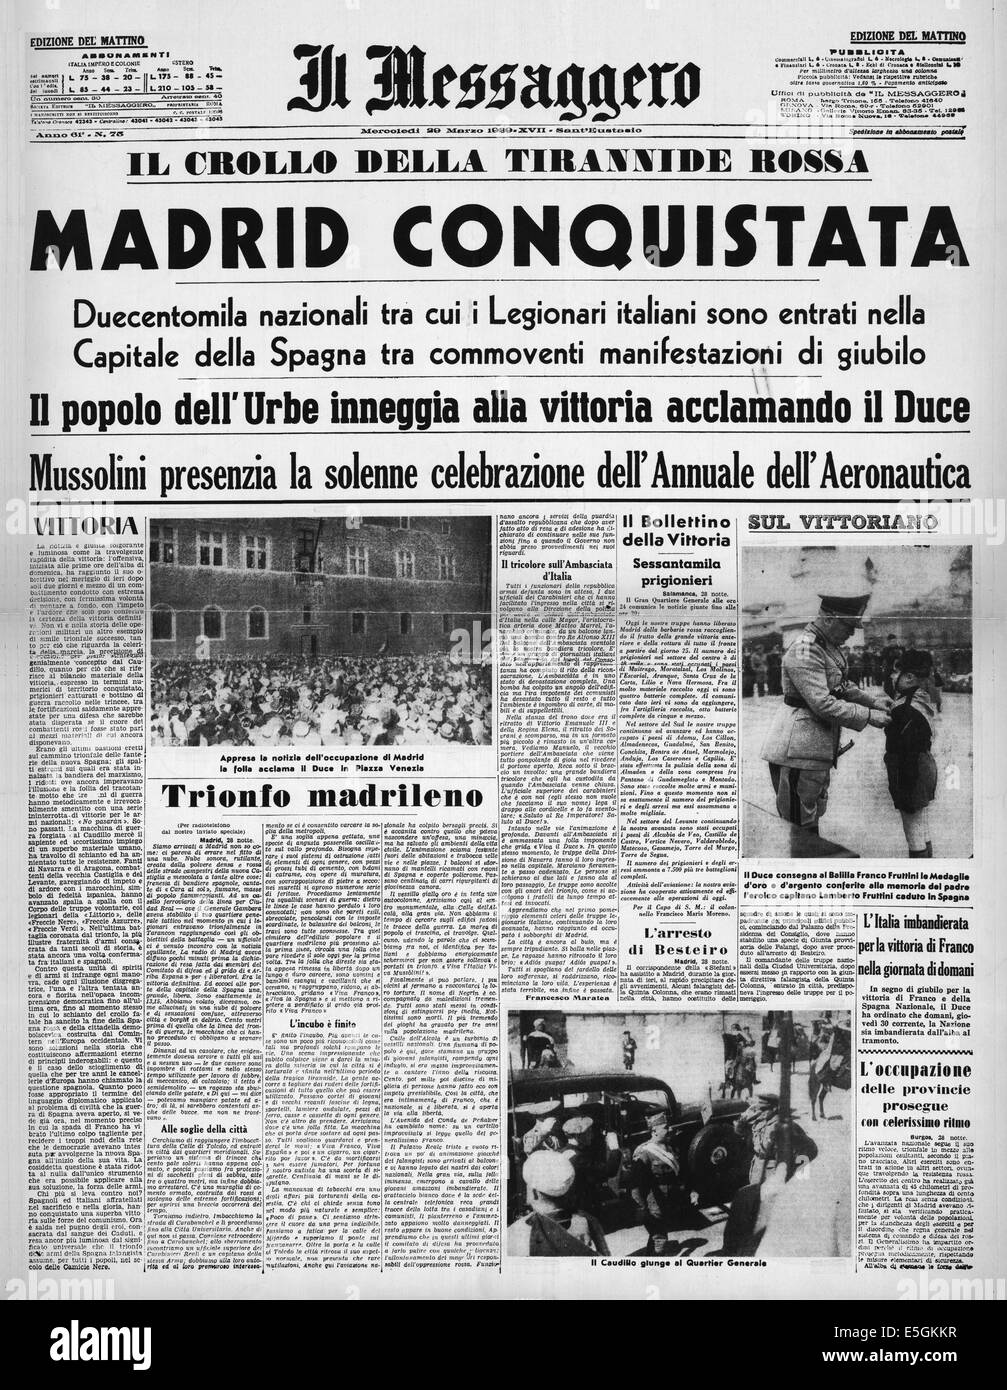 1939 Il Messaggero (Italy) front page reporting the surrender of Madrid during the Spanish Civil War Stock Photo